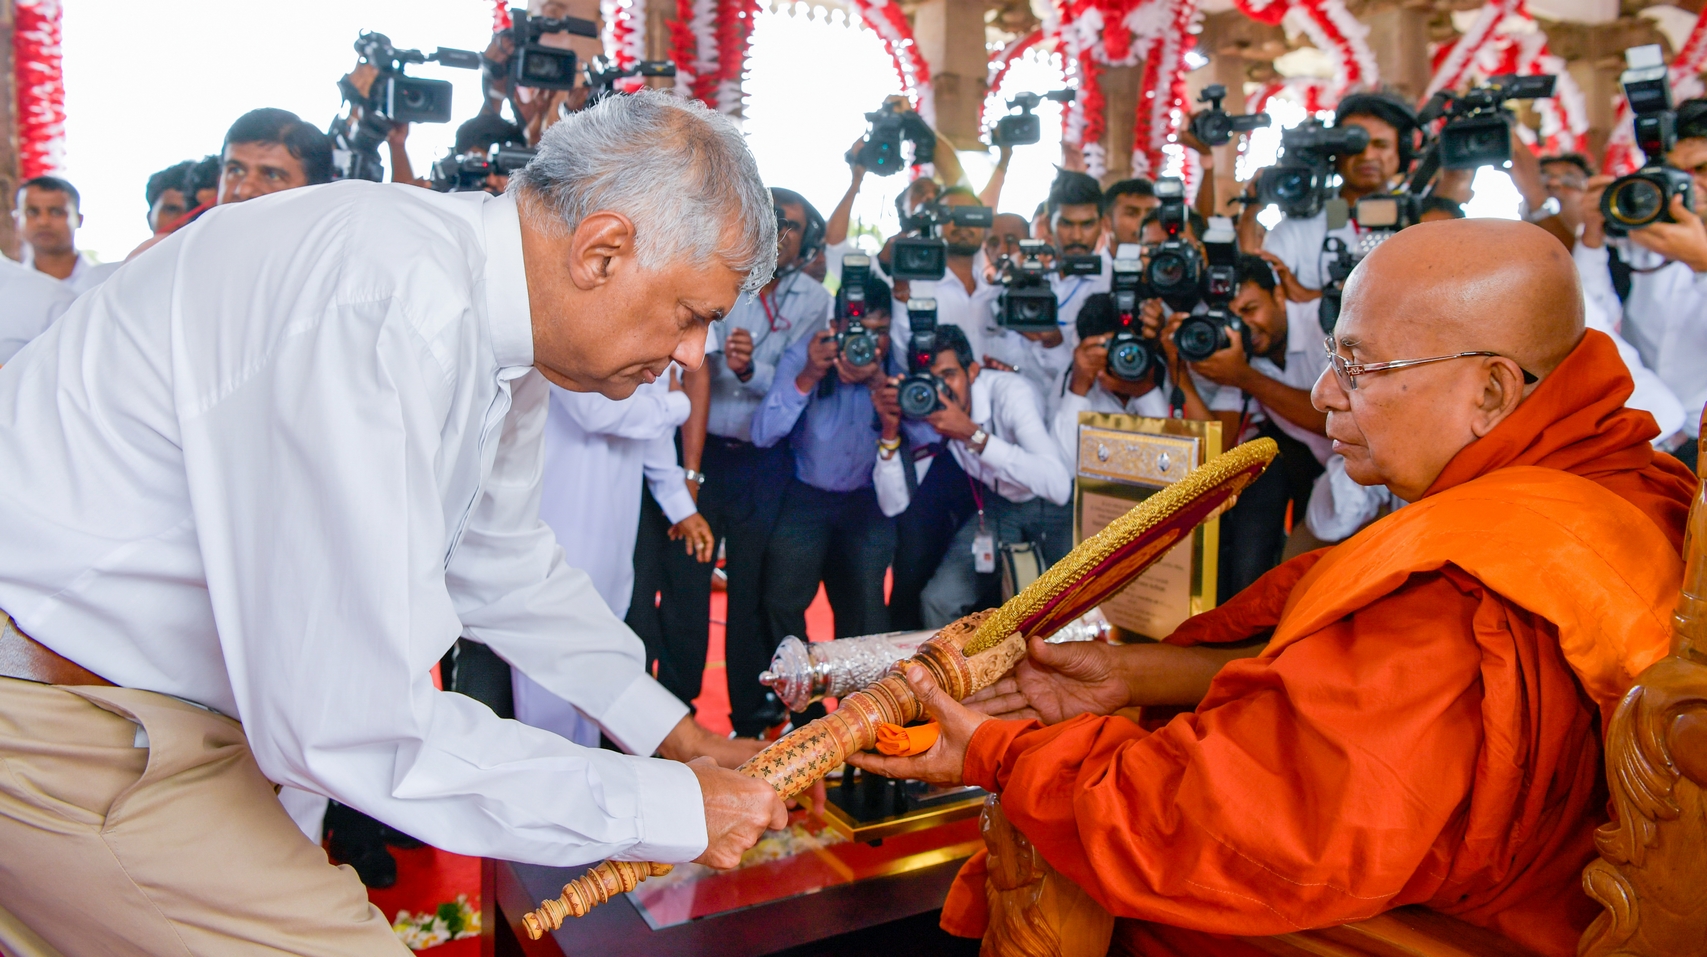 Sri Lankan leaders pay tribute to Buddhist monk | Tamil Guardian